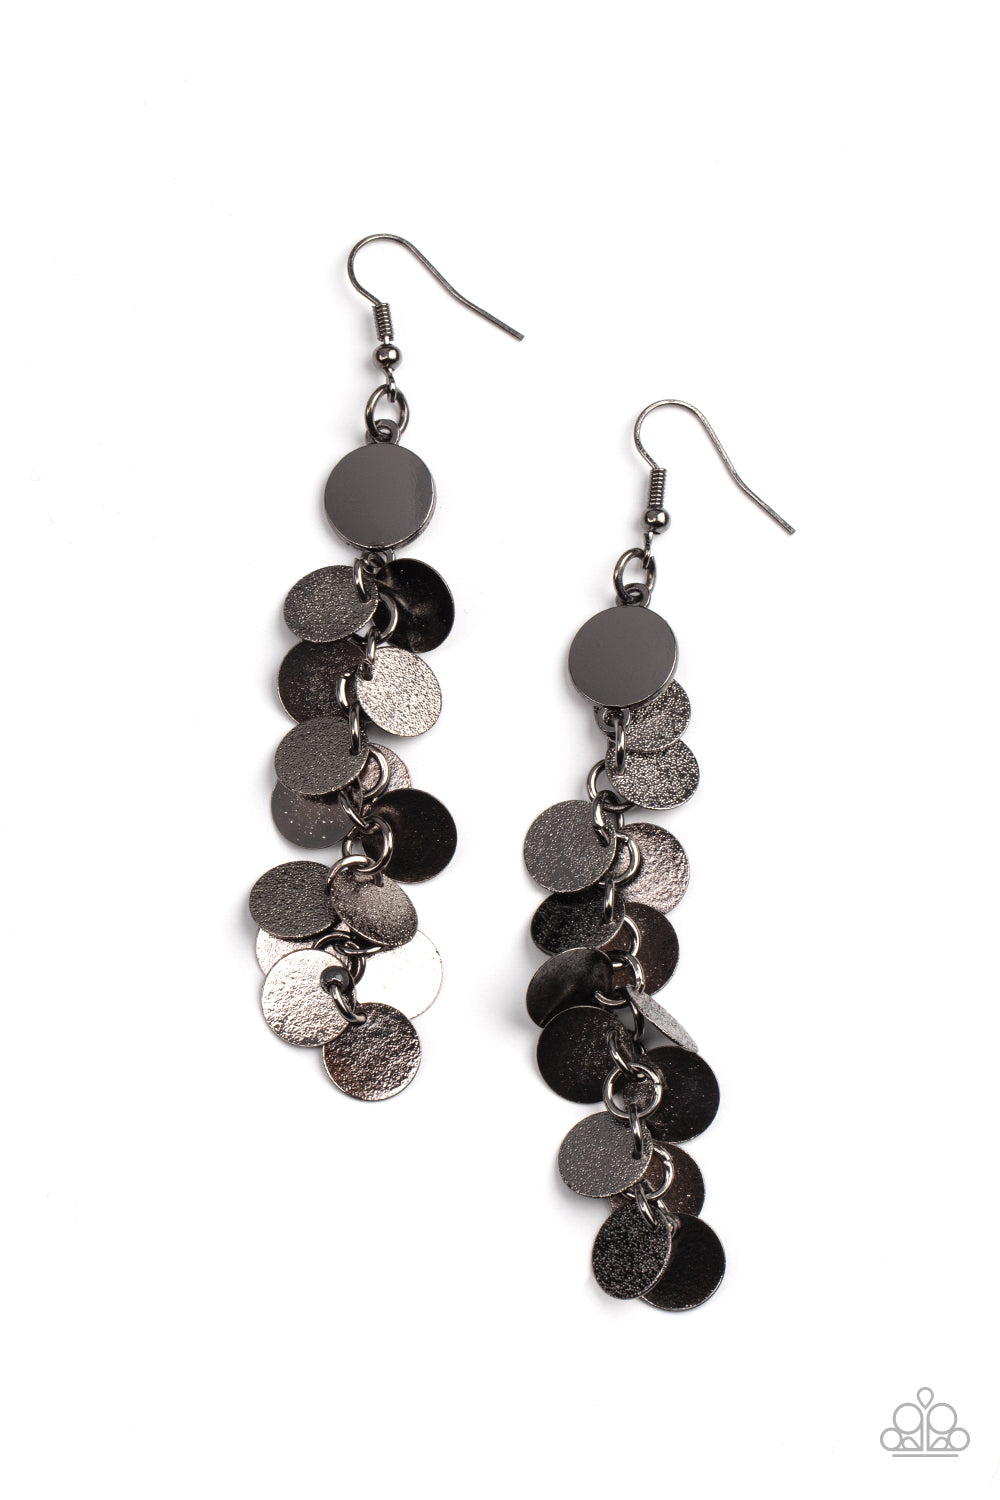 five-dollar-jewelry-game-chime-black-earrings-paparazzi-accessories